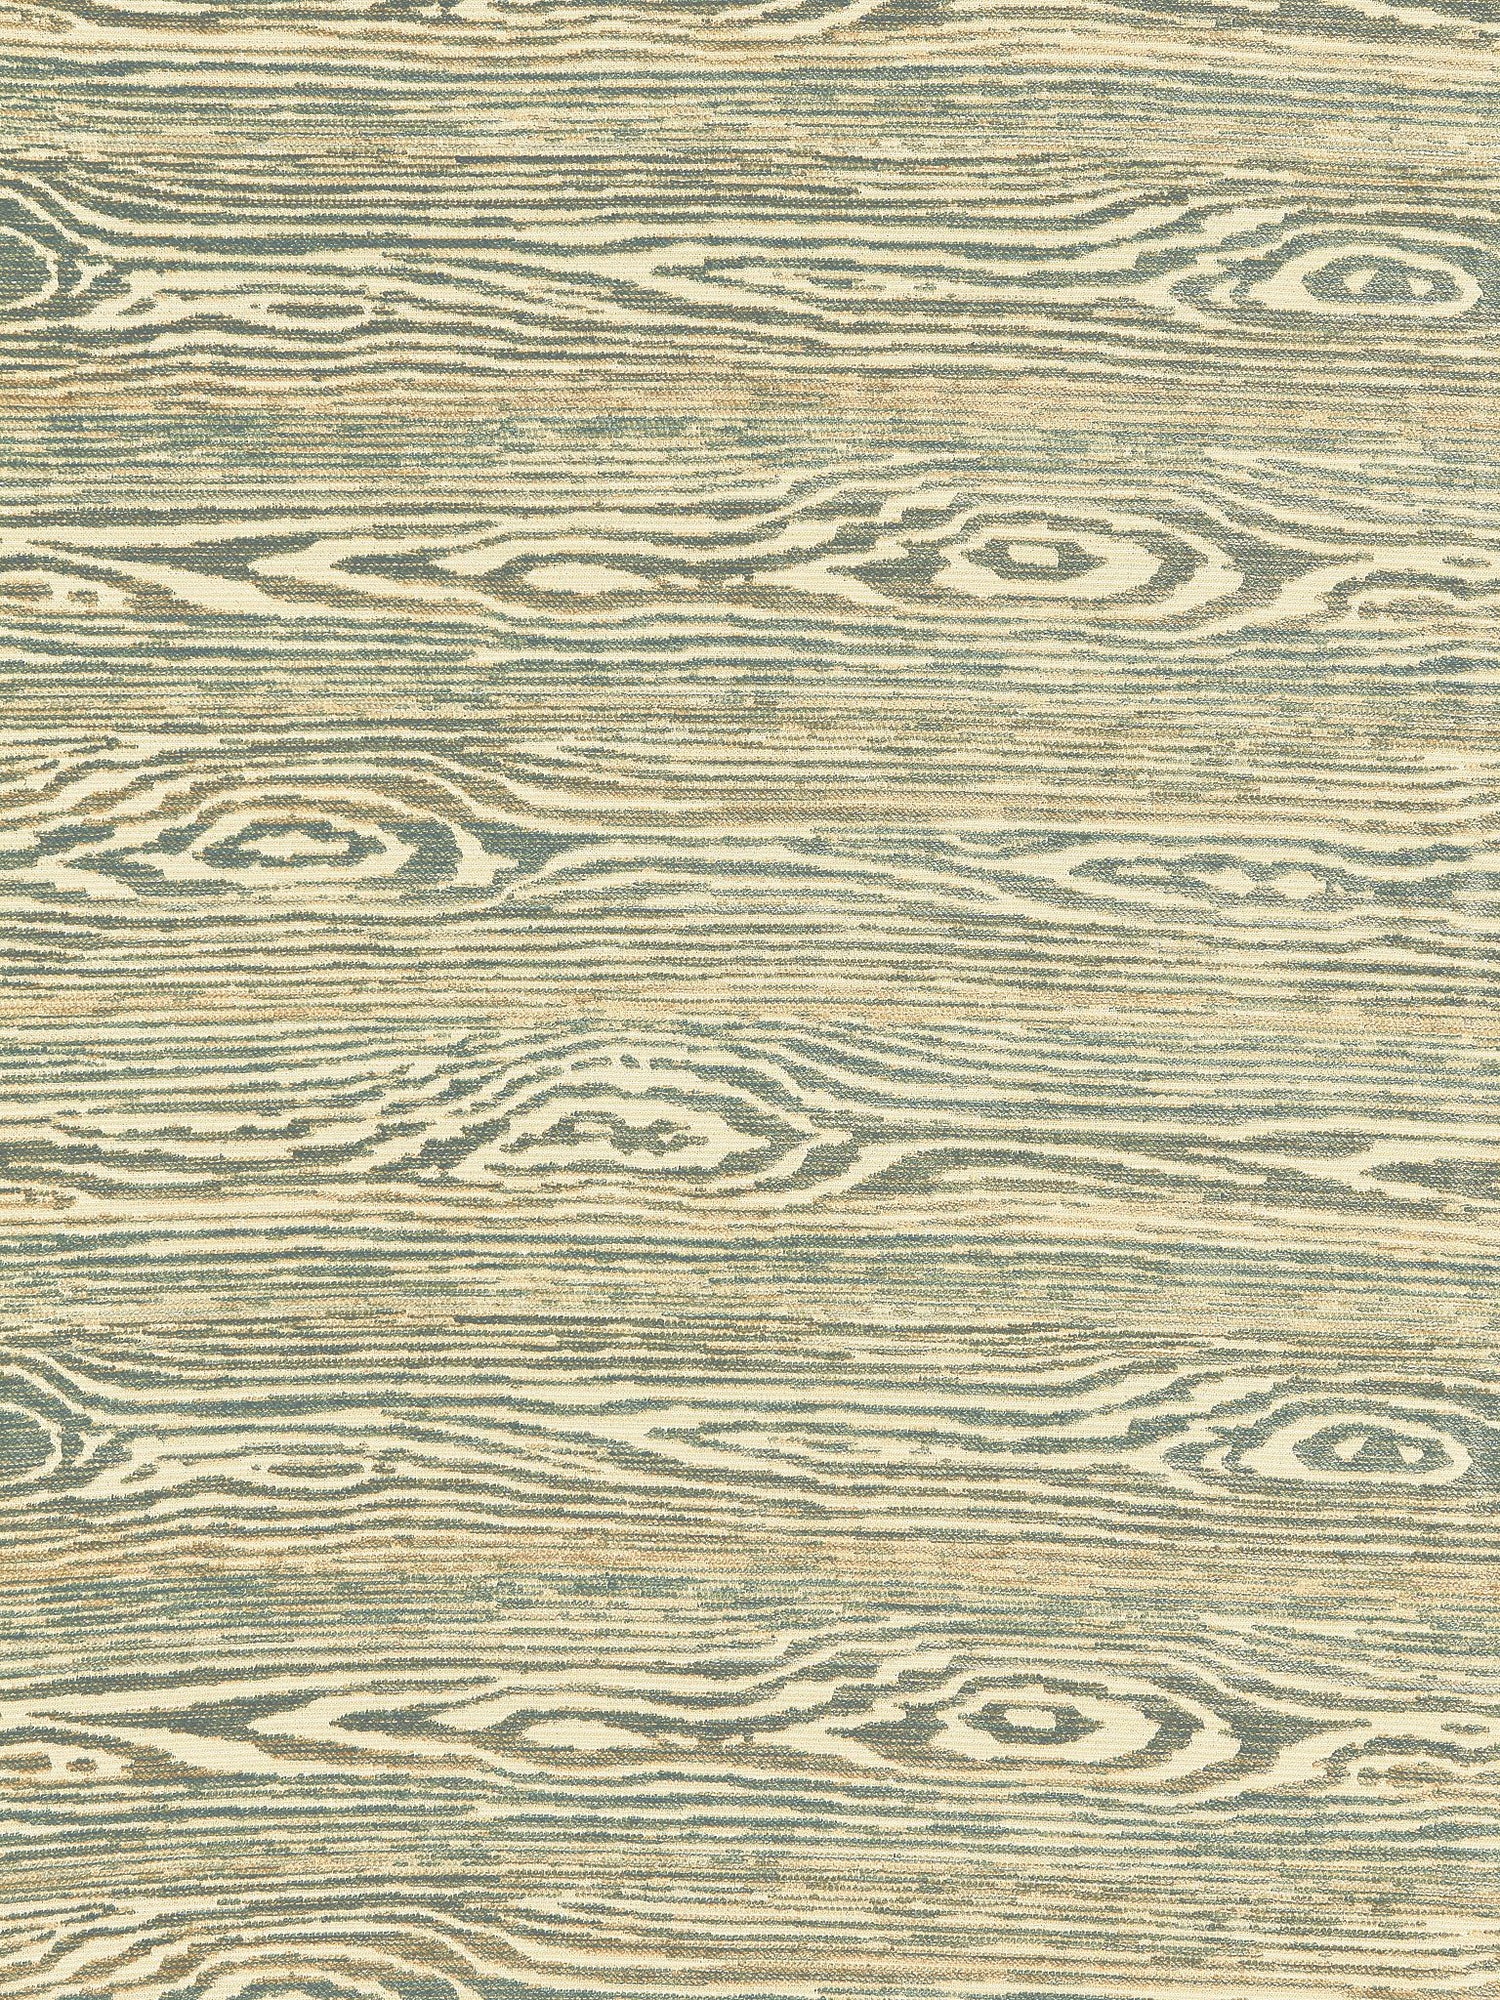 Muir Woods fabric in mineral color - pattern number CD 0011OB41 - by Scalamandre in the Old World Weavers collection